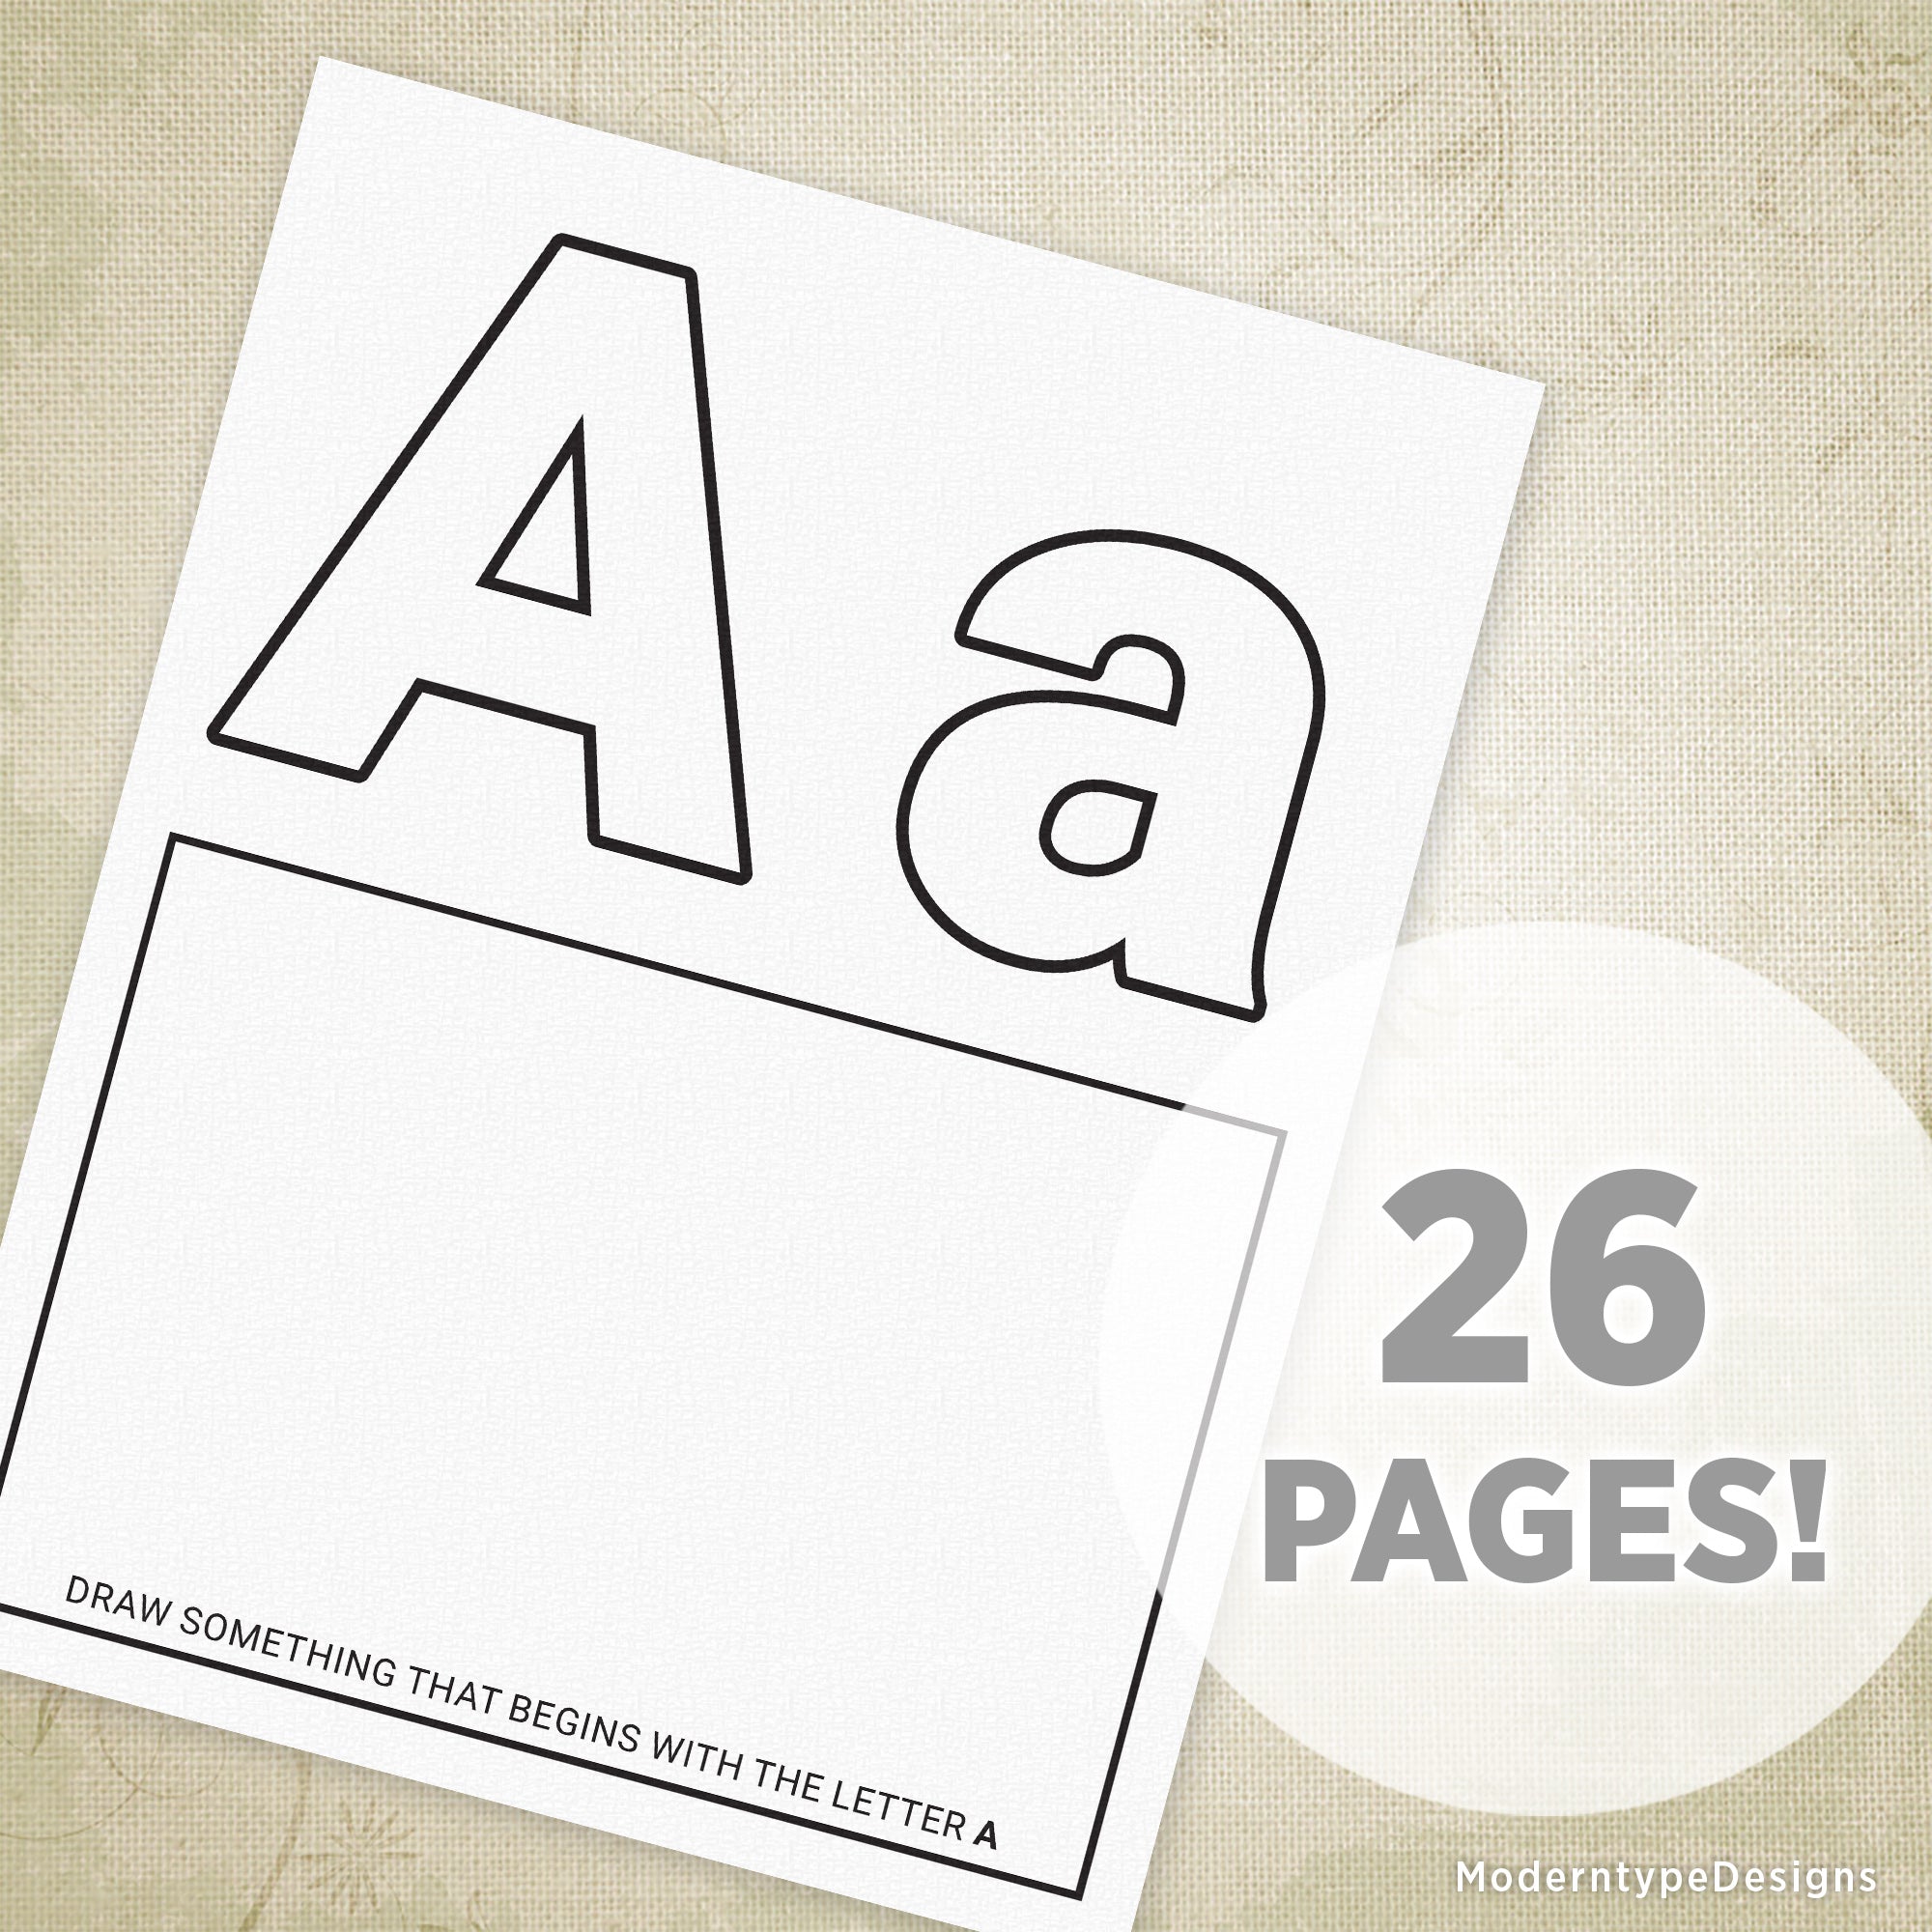 A-Z Alphabet Coloring Pages Printable